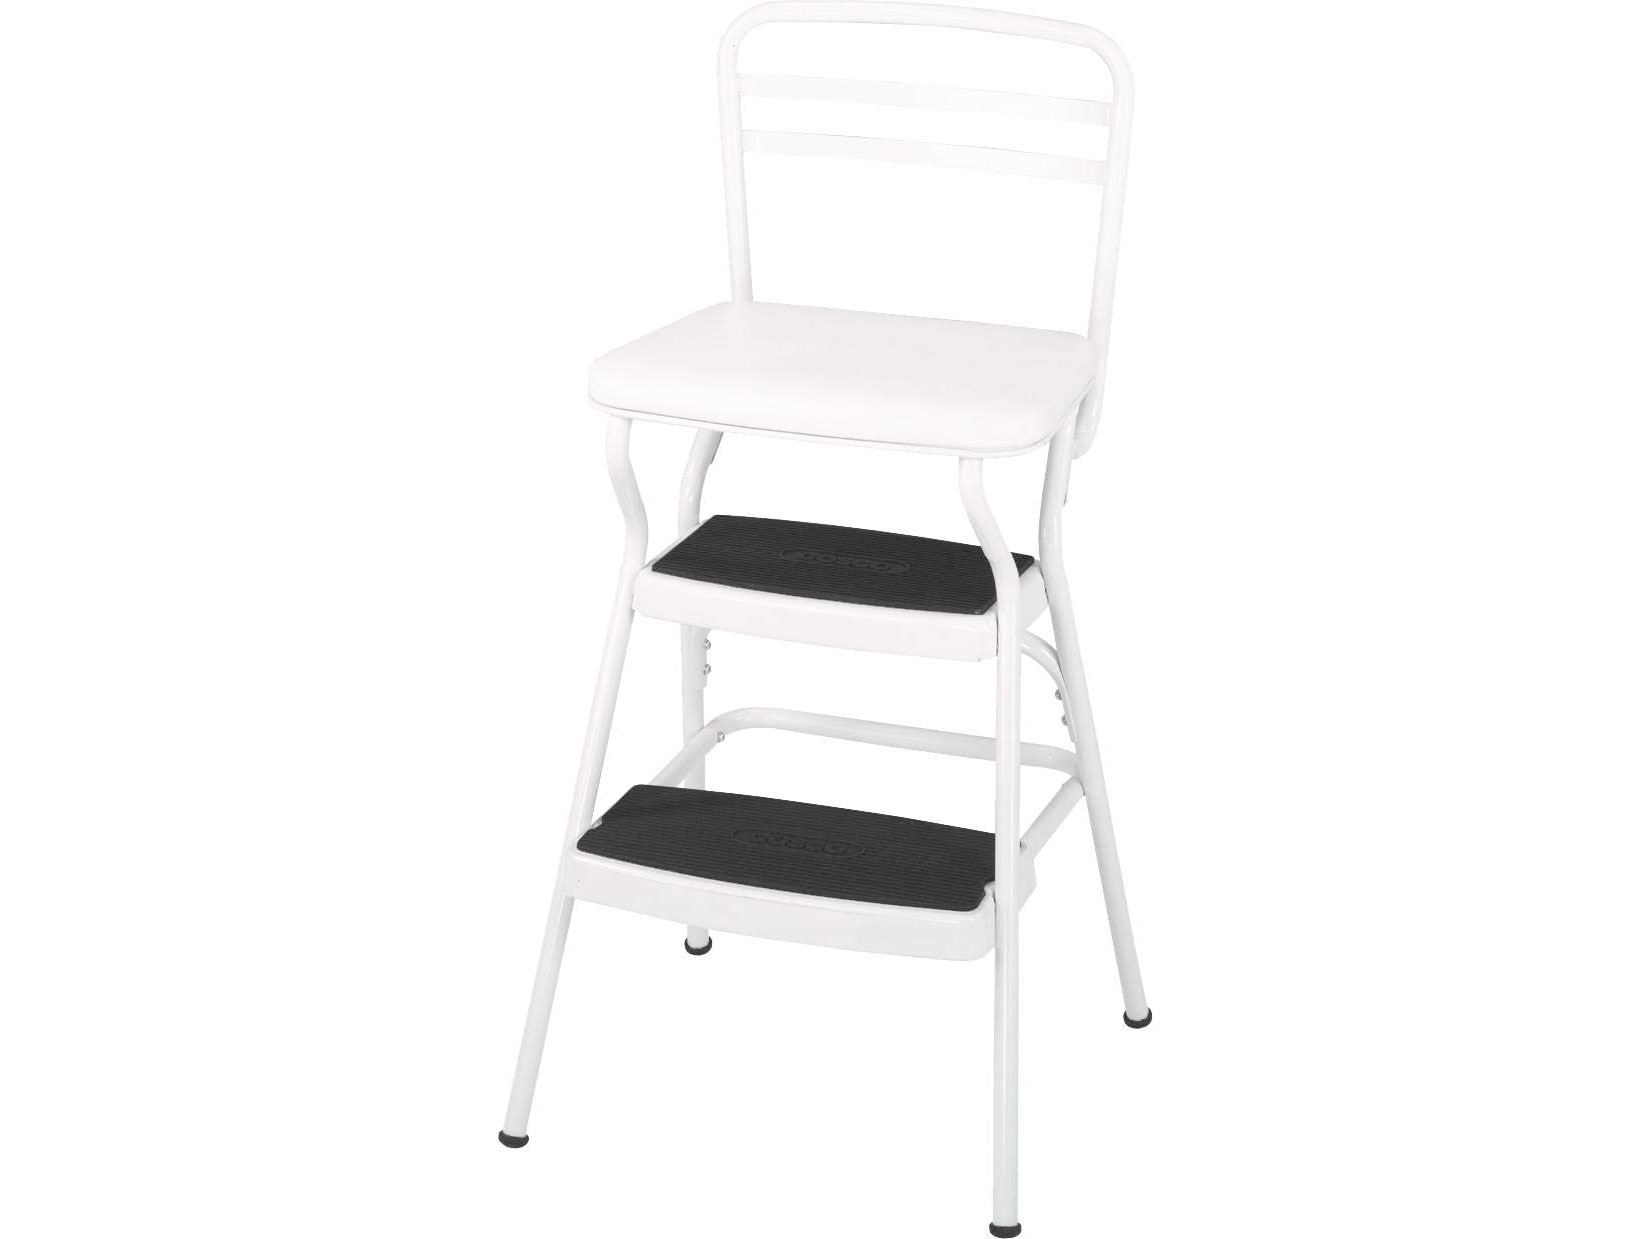 Amazon：Cosco White Retro Counter Chair / Step Stool with Lift-up Seat只賣$70.13